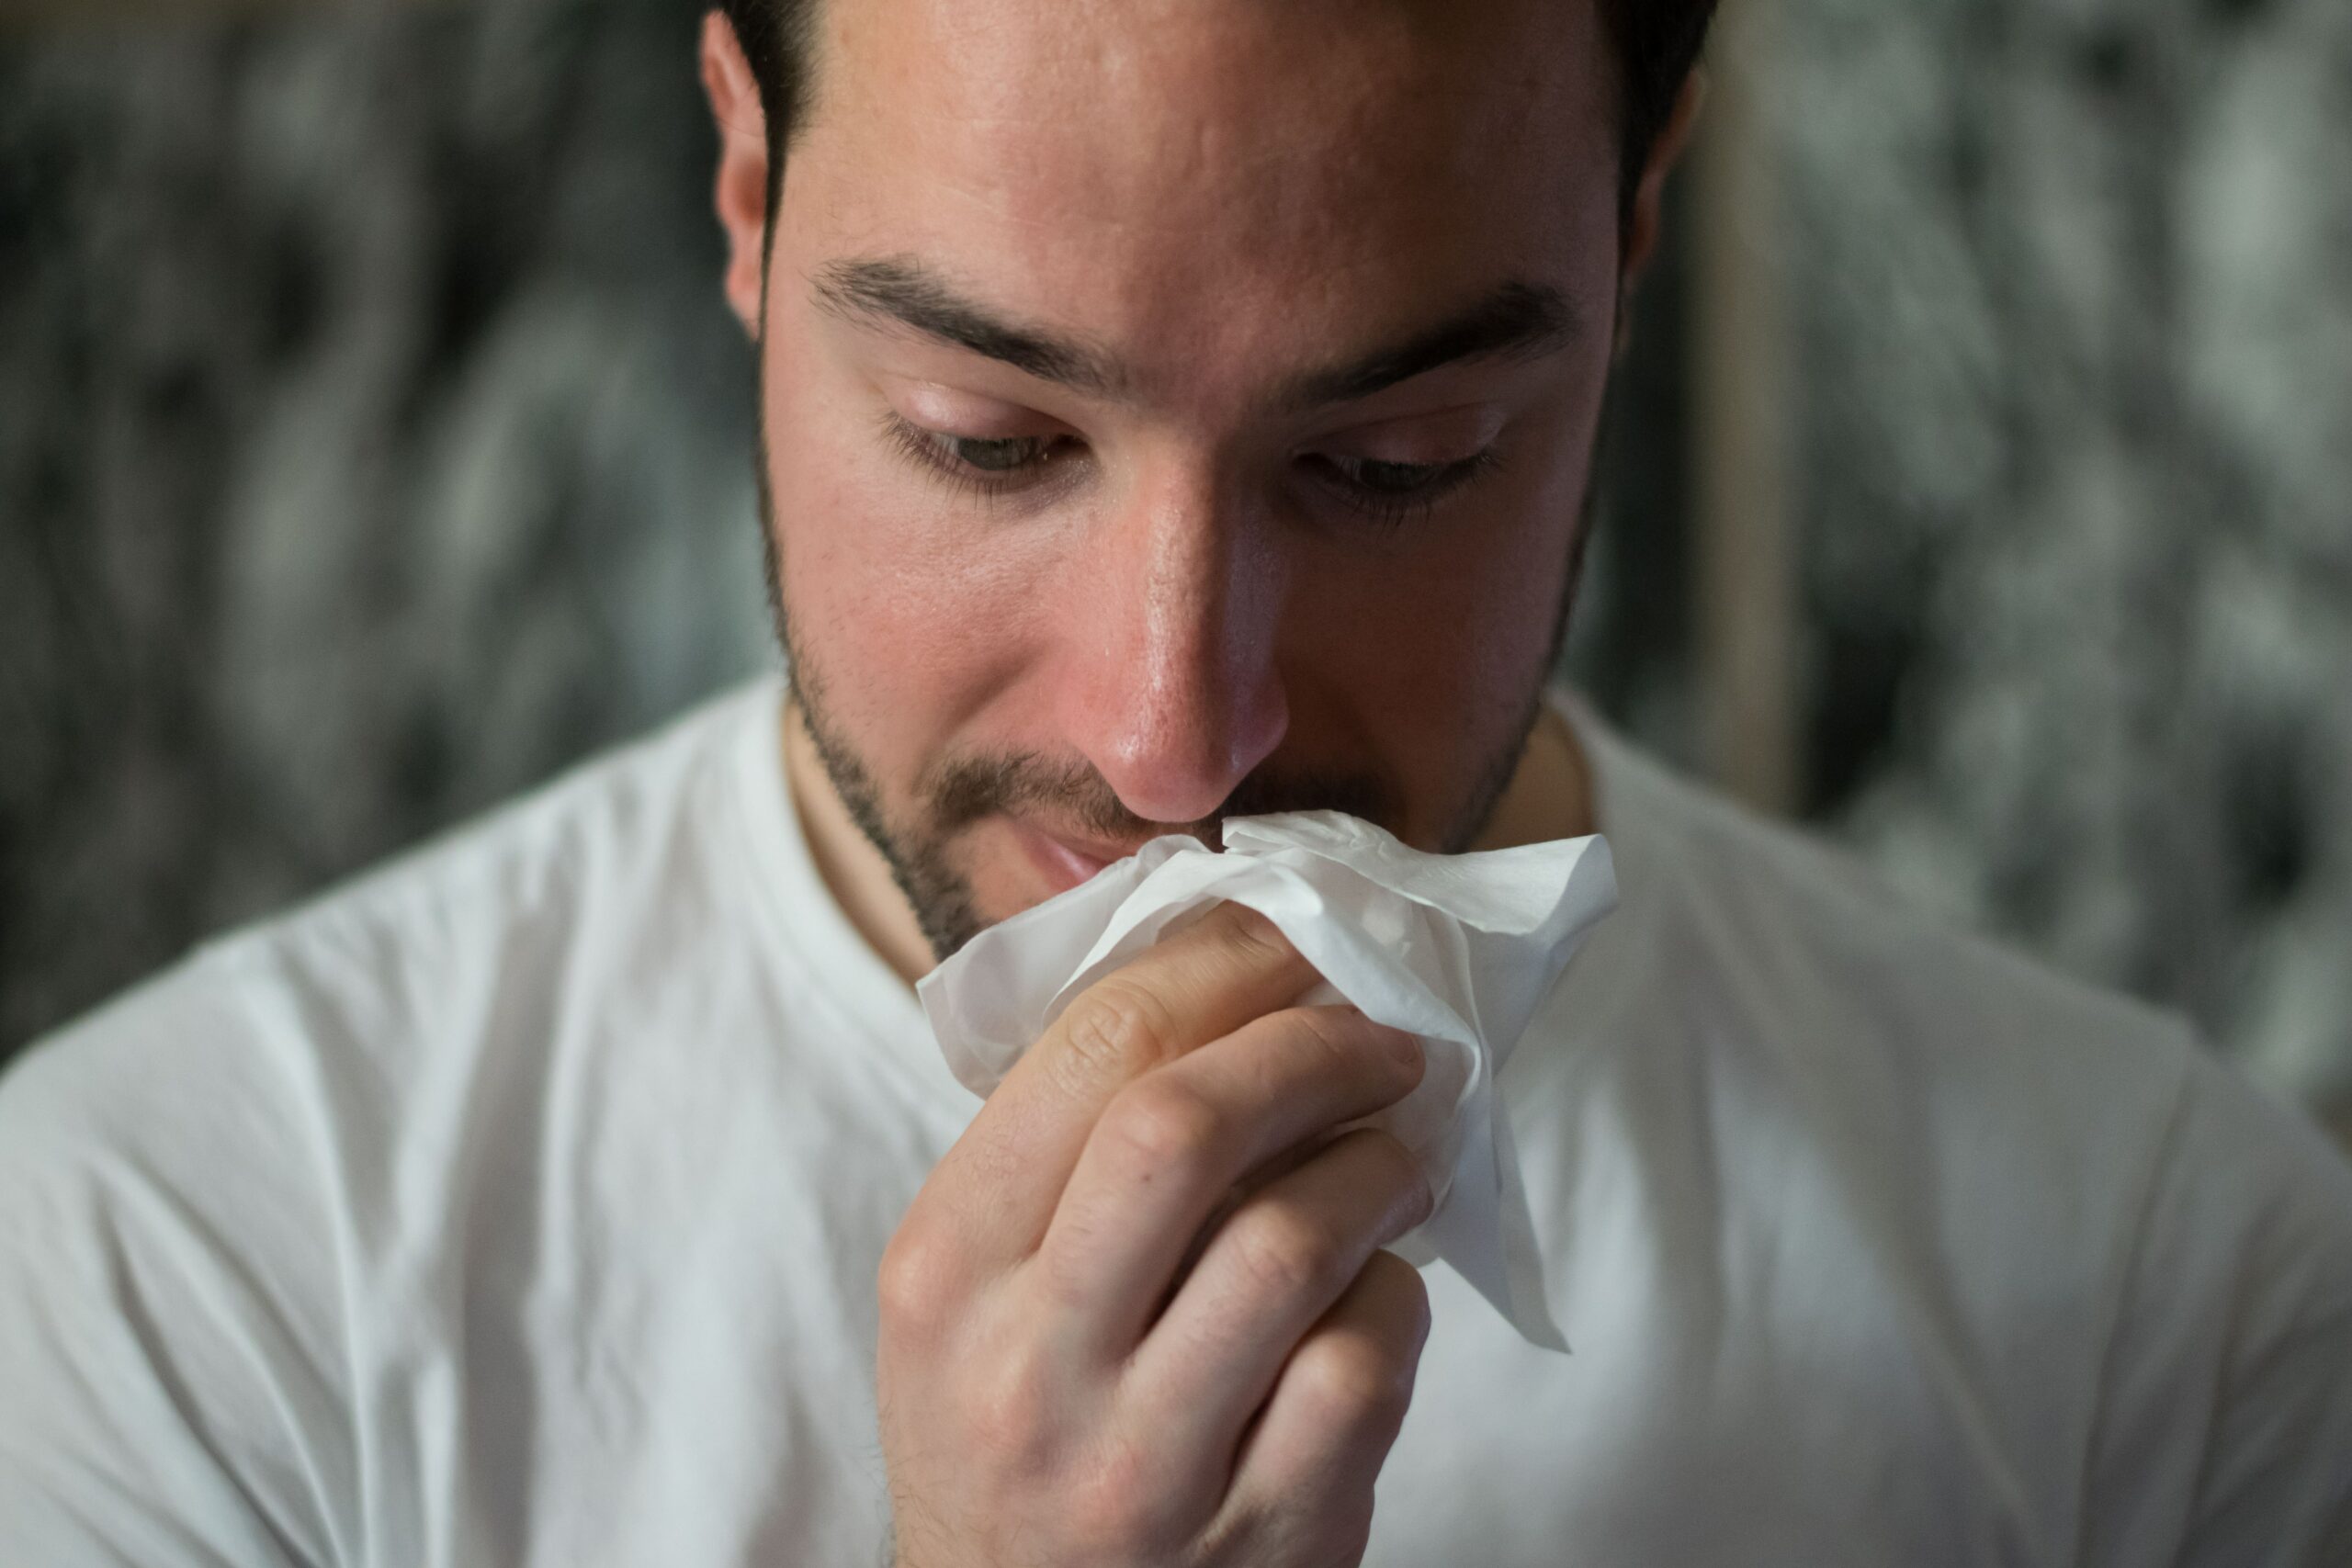 How to get rid of a stuffy nose?